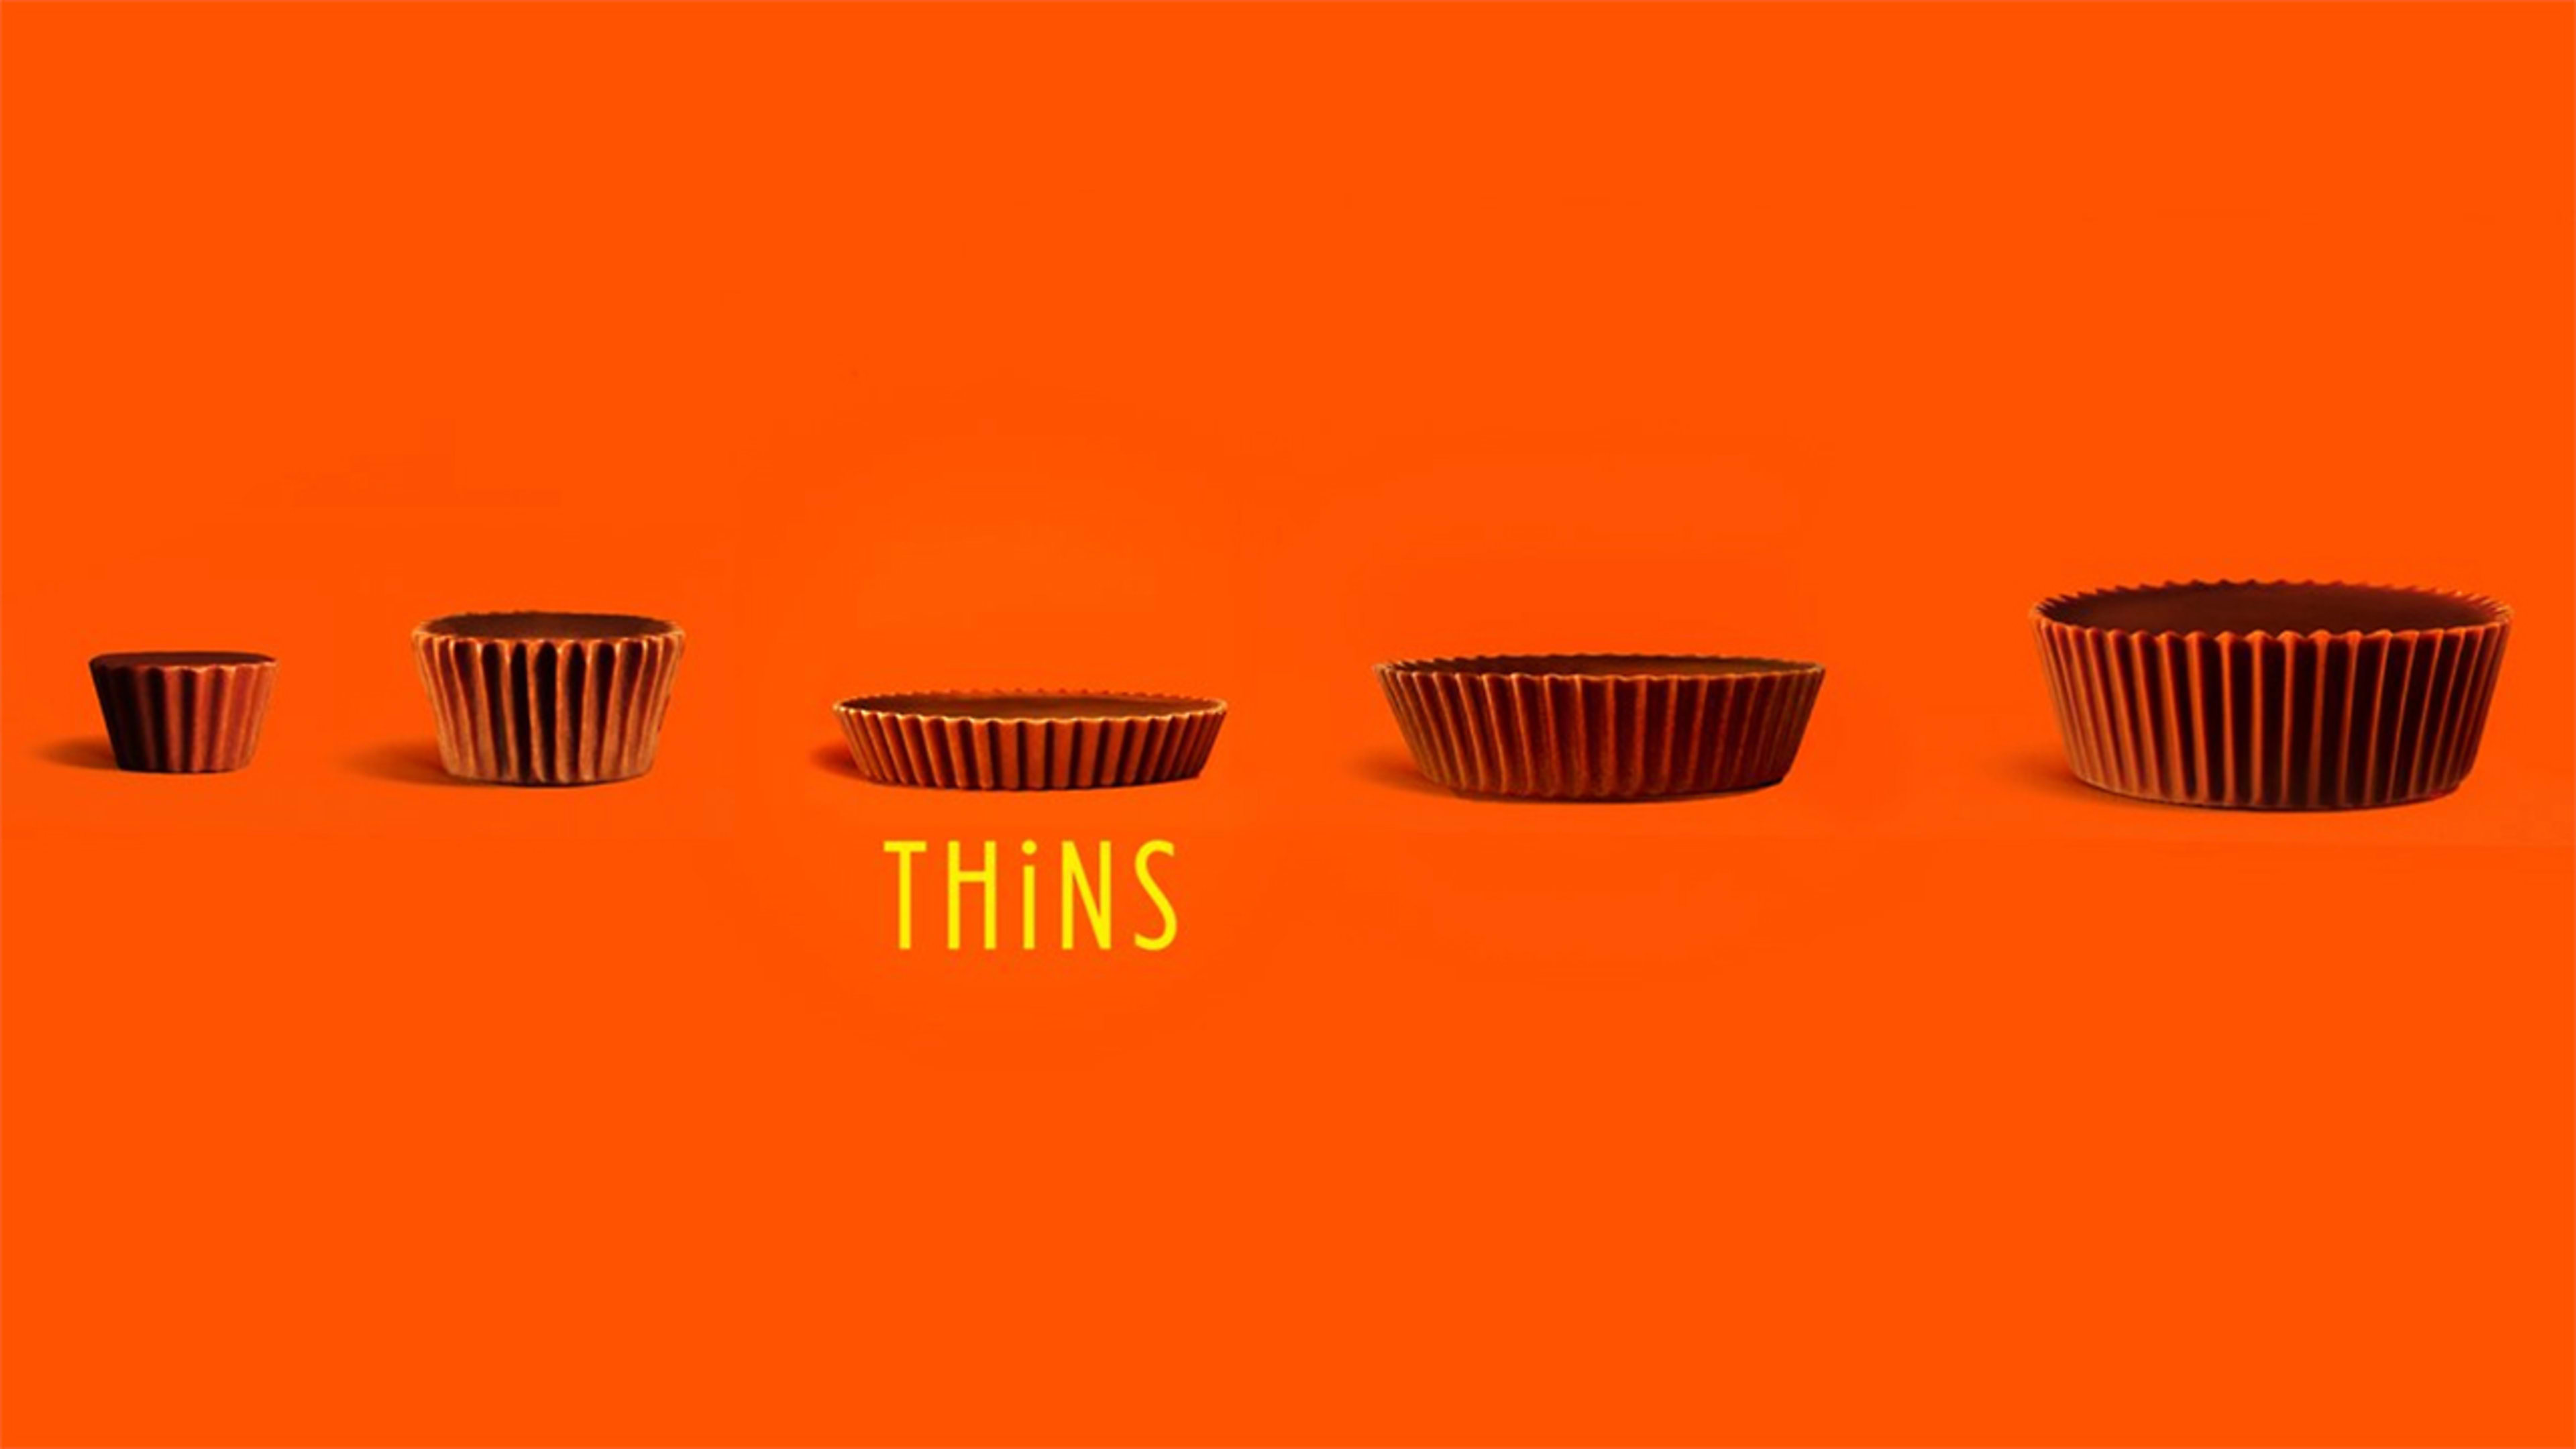 Reese’s doesn’t care what you think about its thin peanut butter cups